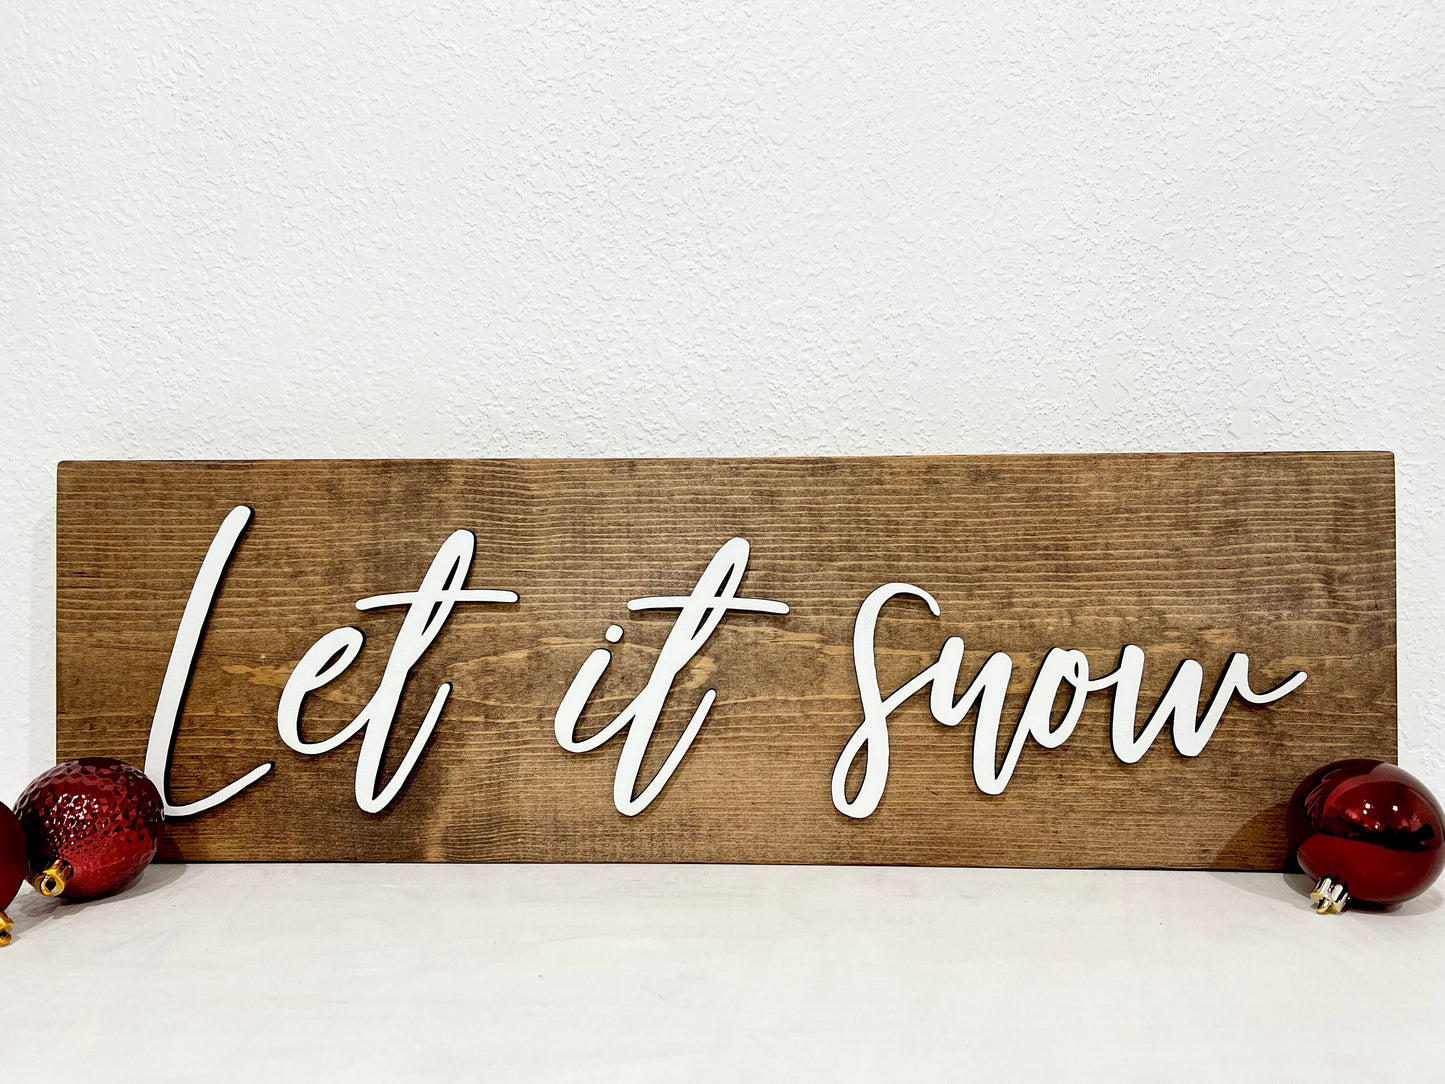 Let it snow sign, Christmas decorations, 3D holiday decor, rustic wood signs, living room wooden sign wall hanging, shelf and mantel decor